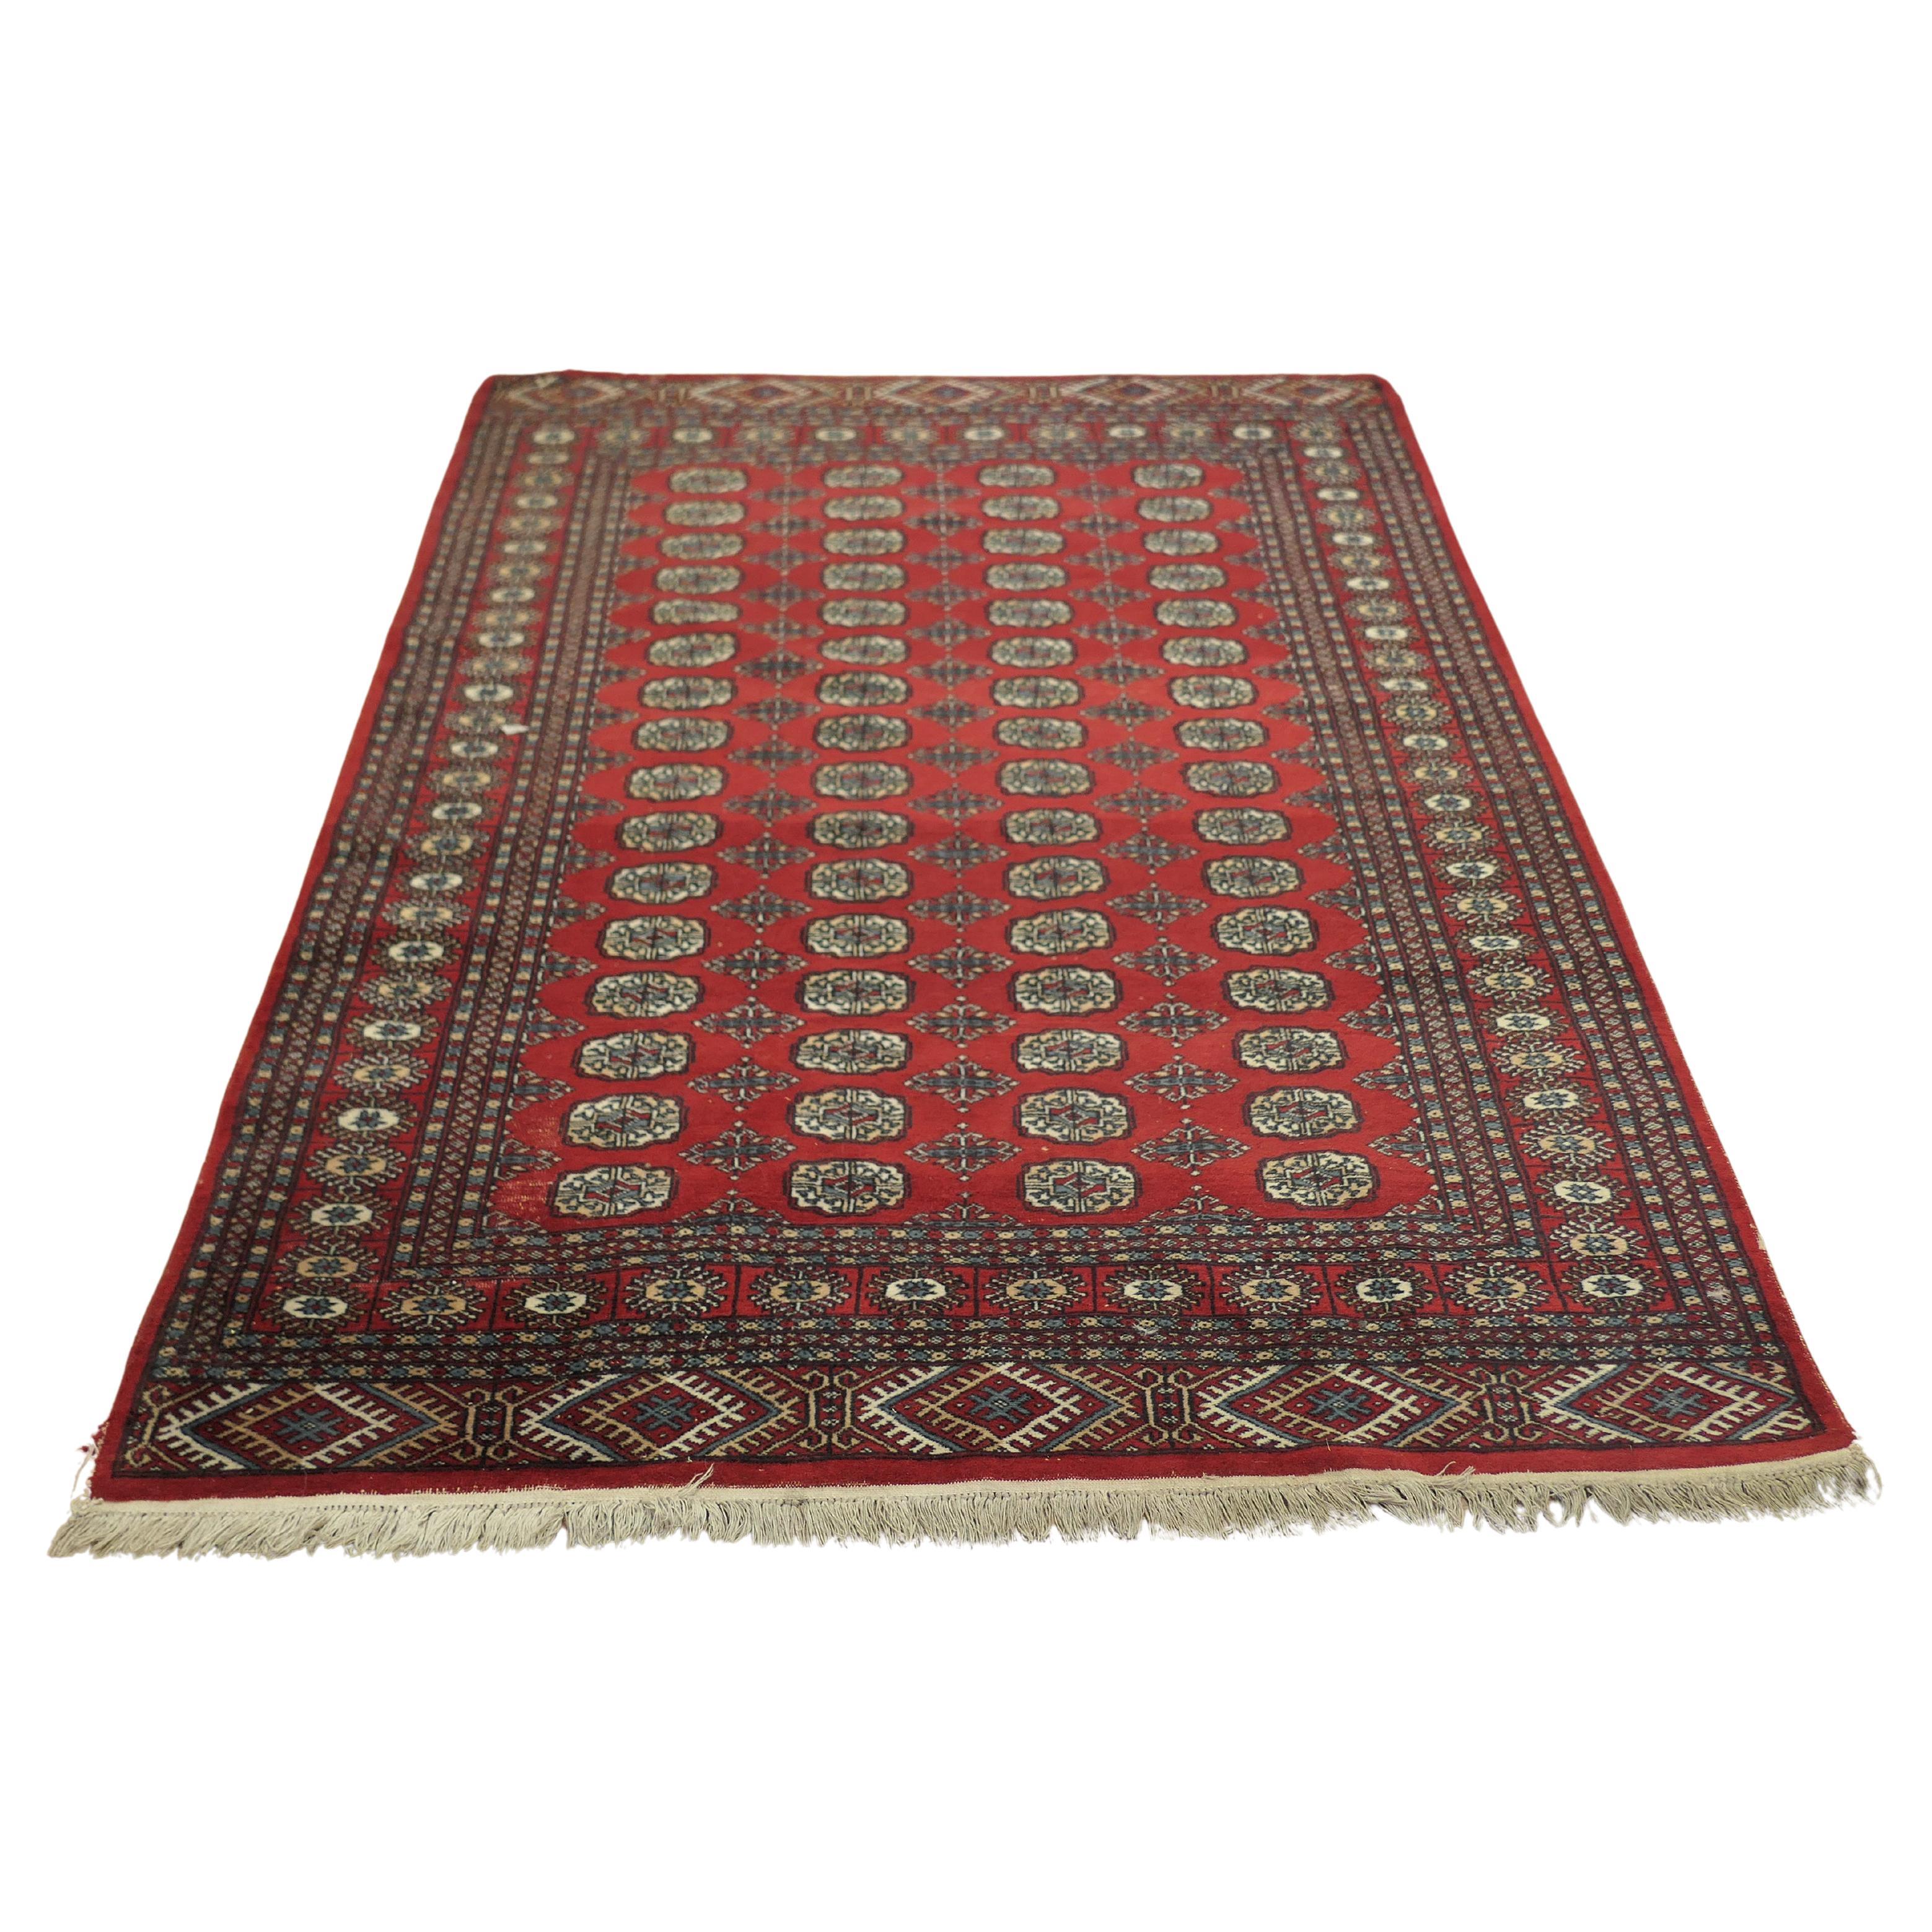 A Lovely Bright Red Wool Rug  The Carpet is a wonderful Bright colour   For Sale